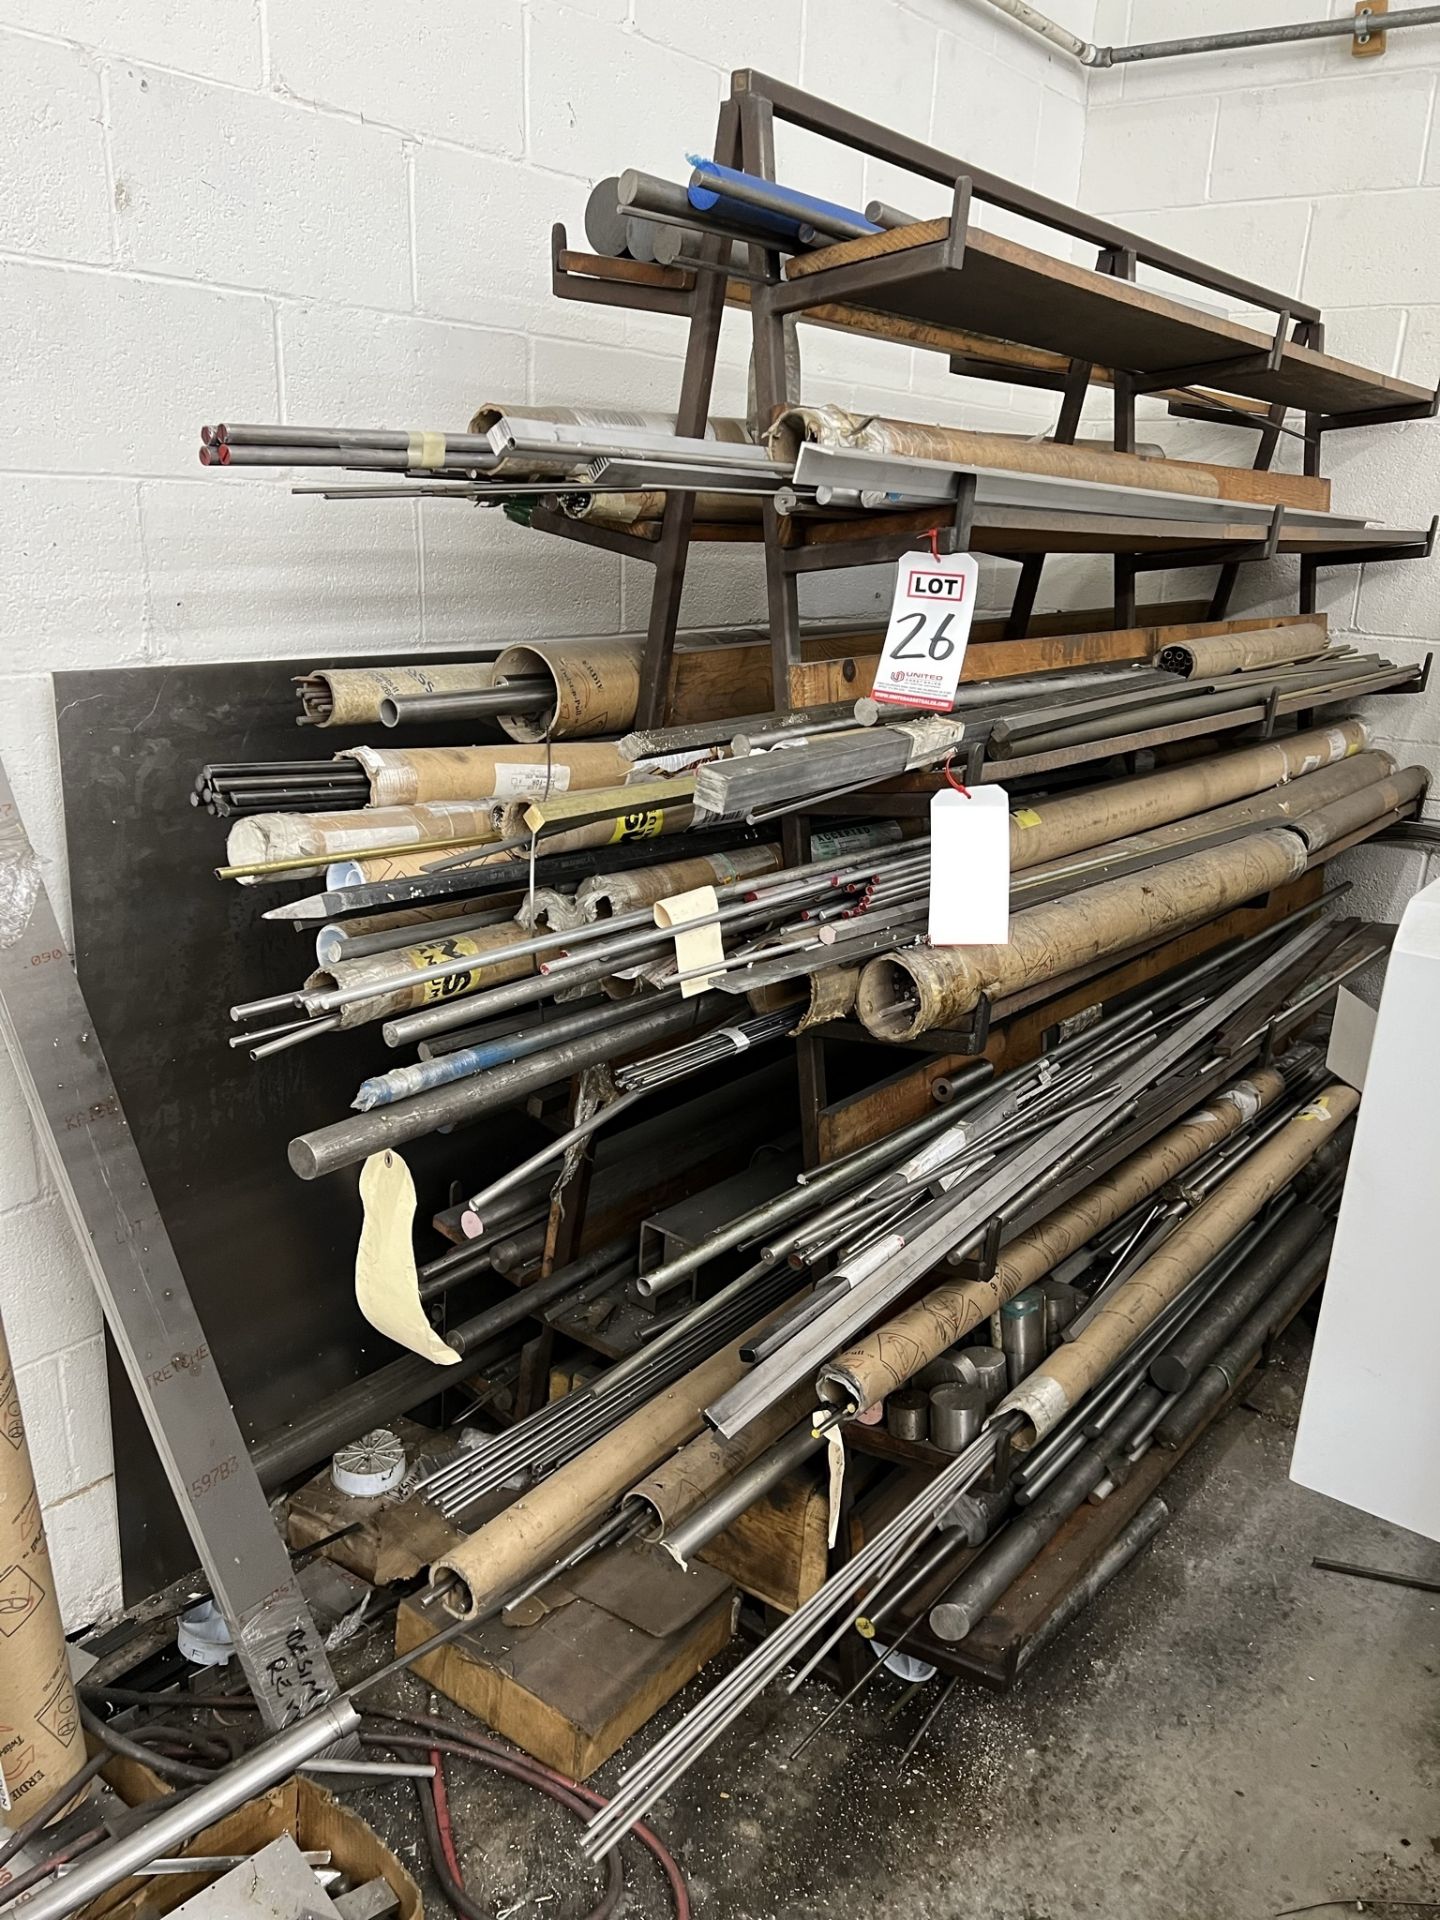 LOT - MATERIAL RACK, W/ CONTENTS: STEEL, STAINLESS STEEL, ALUMINUM, TITANIUM RODS, LENGTHS UP TO 8'